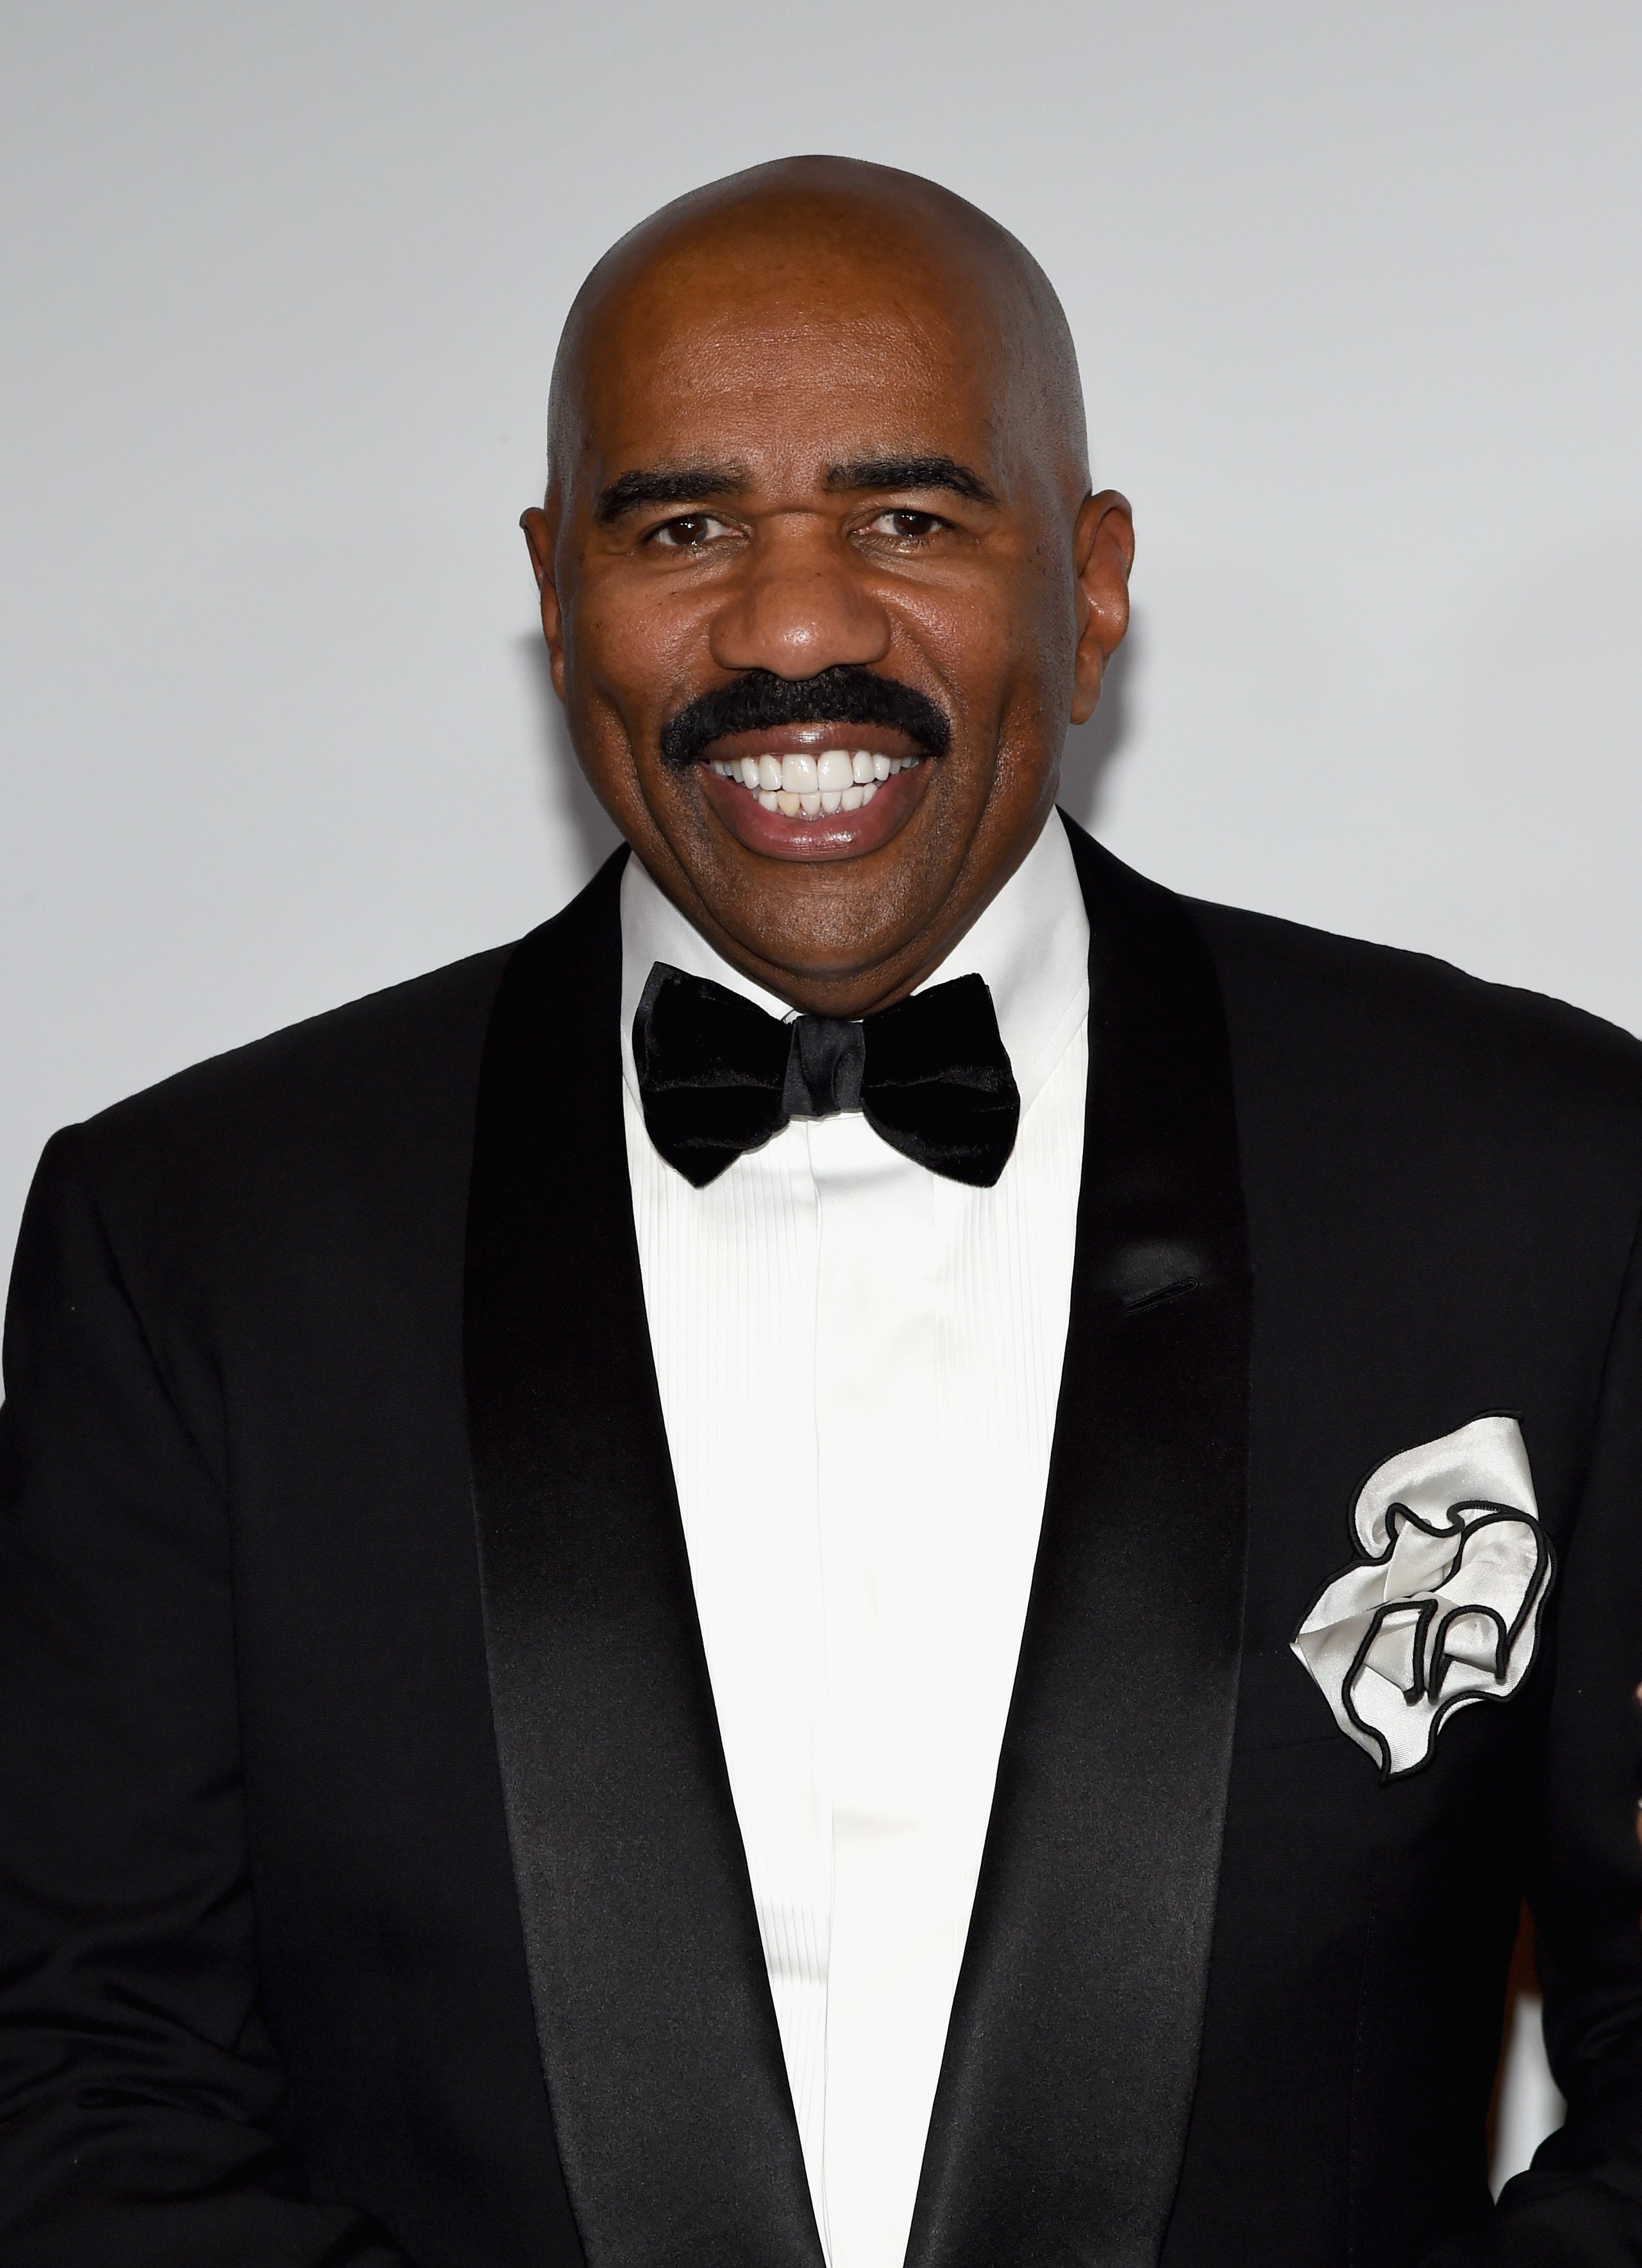 Steve Harvey at the 2015 Miss Universe Pageant at Planet Hollywood Resort & Casino on December 20, 2015 in Las Vegas, Nevada. | Photo: Getty Images